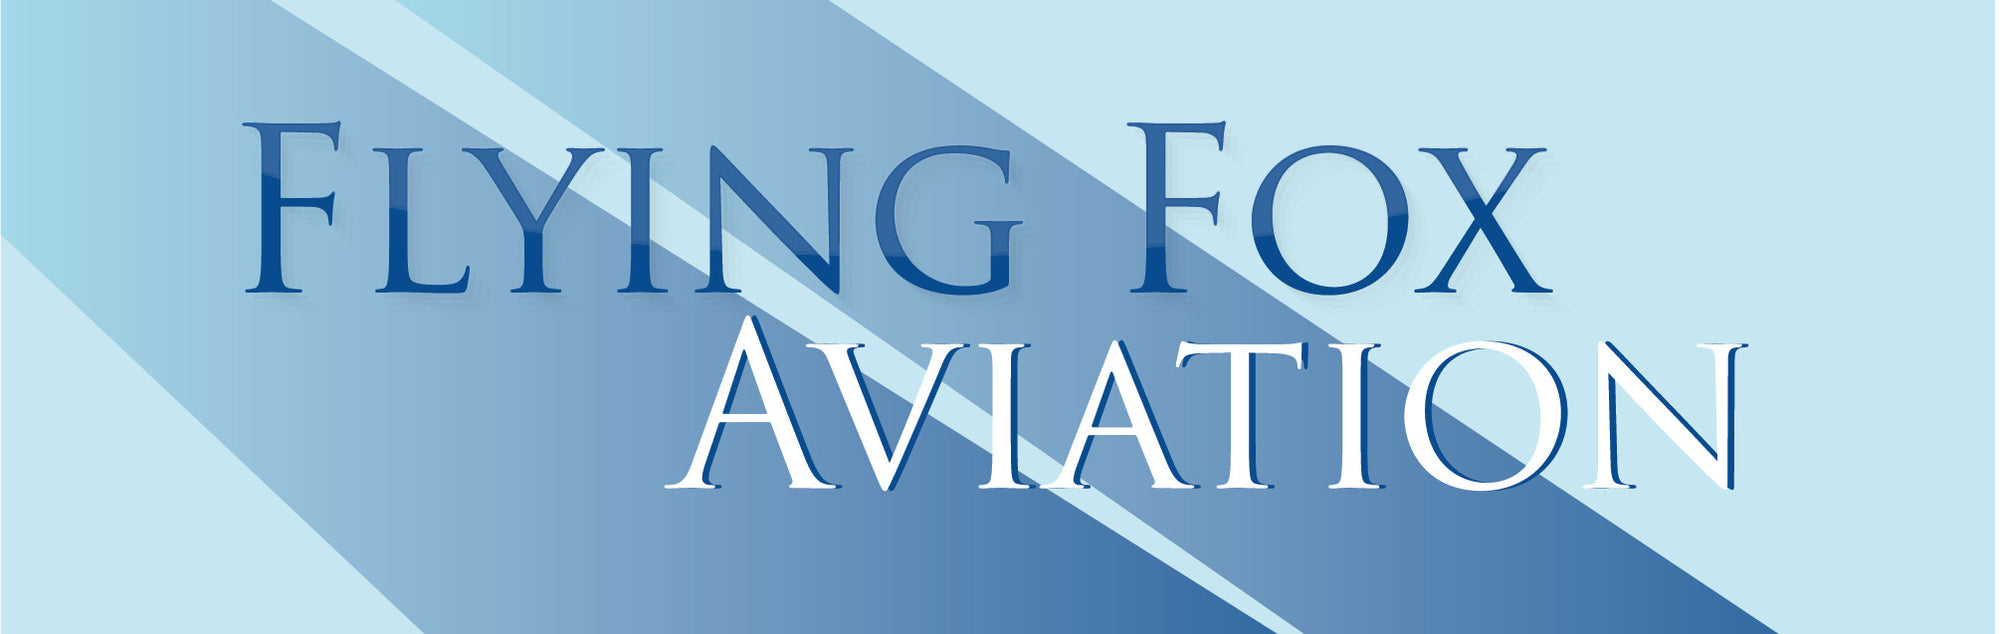 WF Aviation and Flying Fox Aviation enter co-marketing agreement